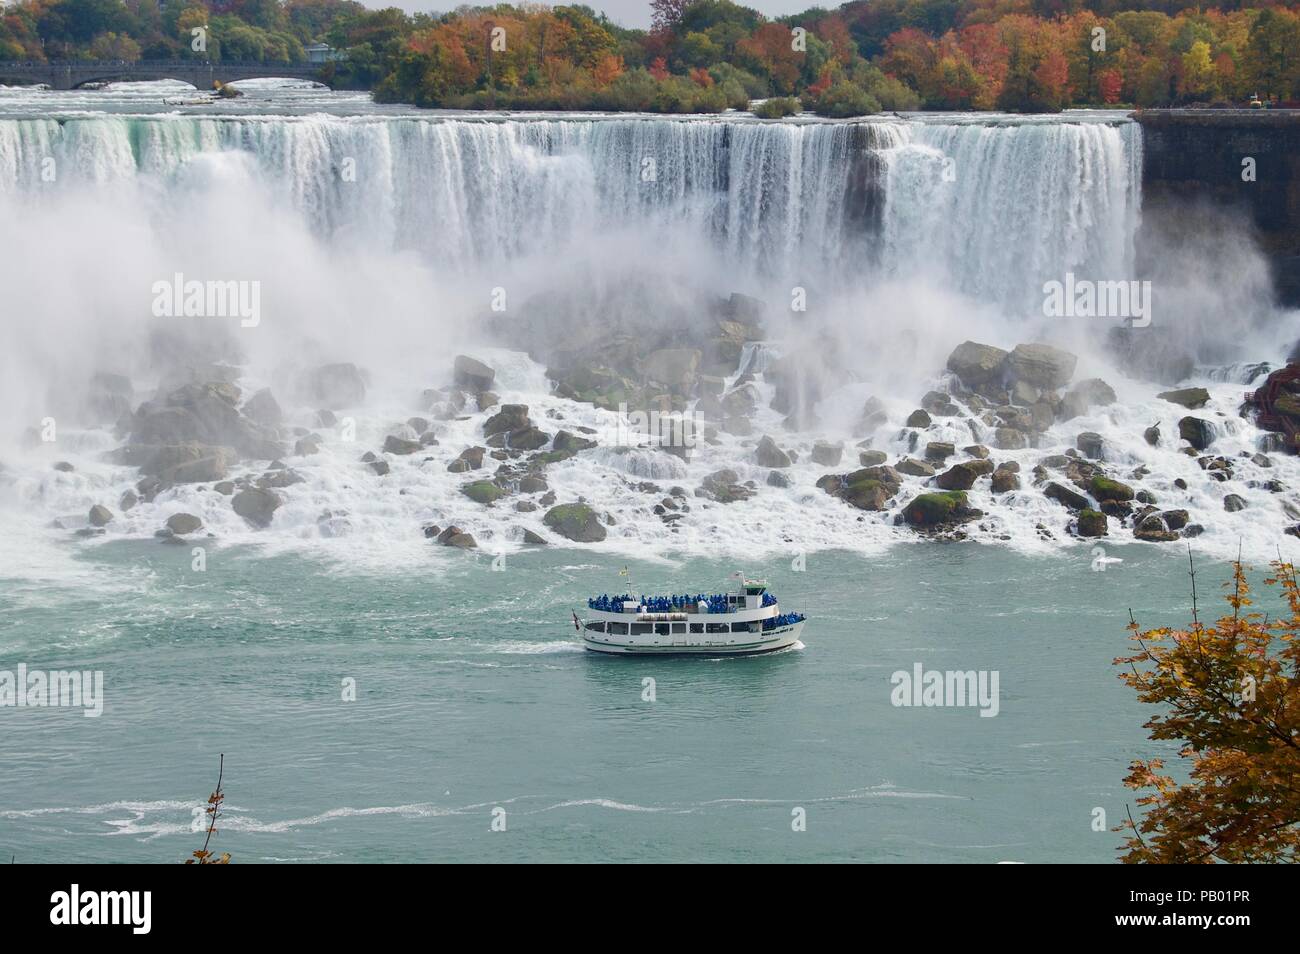 Beautiful and impressive panorama of the Niagara Falls in Ontario (Canada) on a bright colorful autumn day with water crashing down the falls Stock Photo